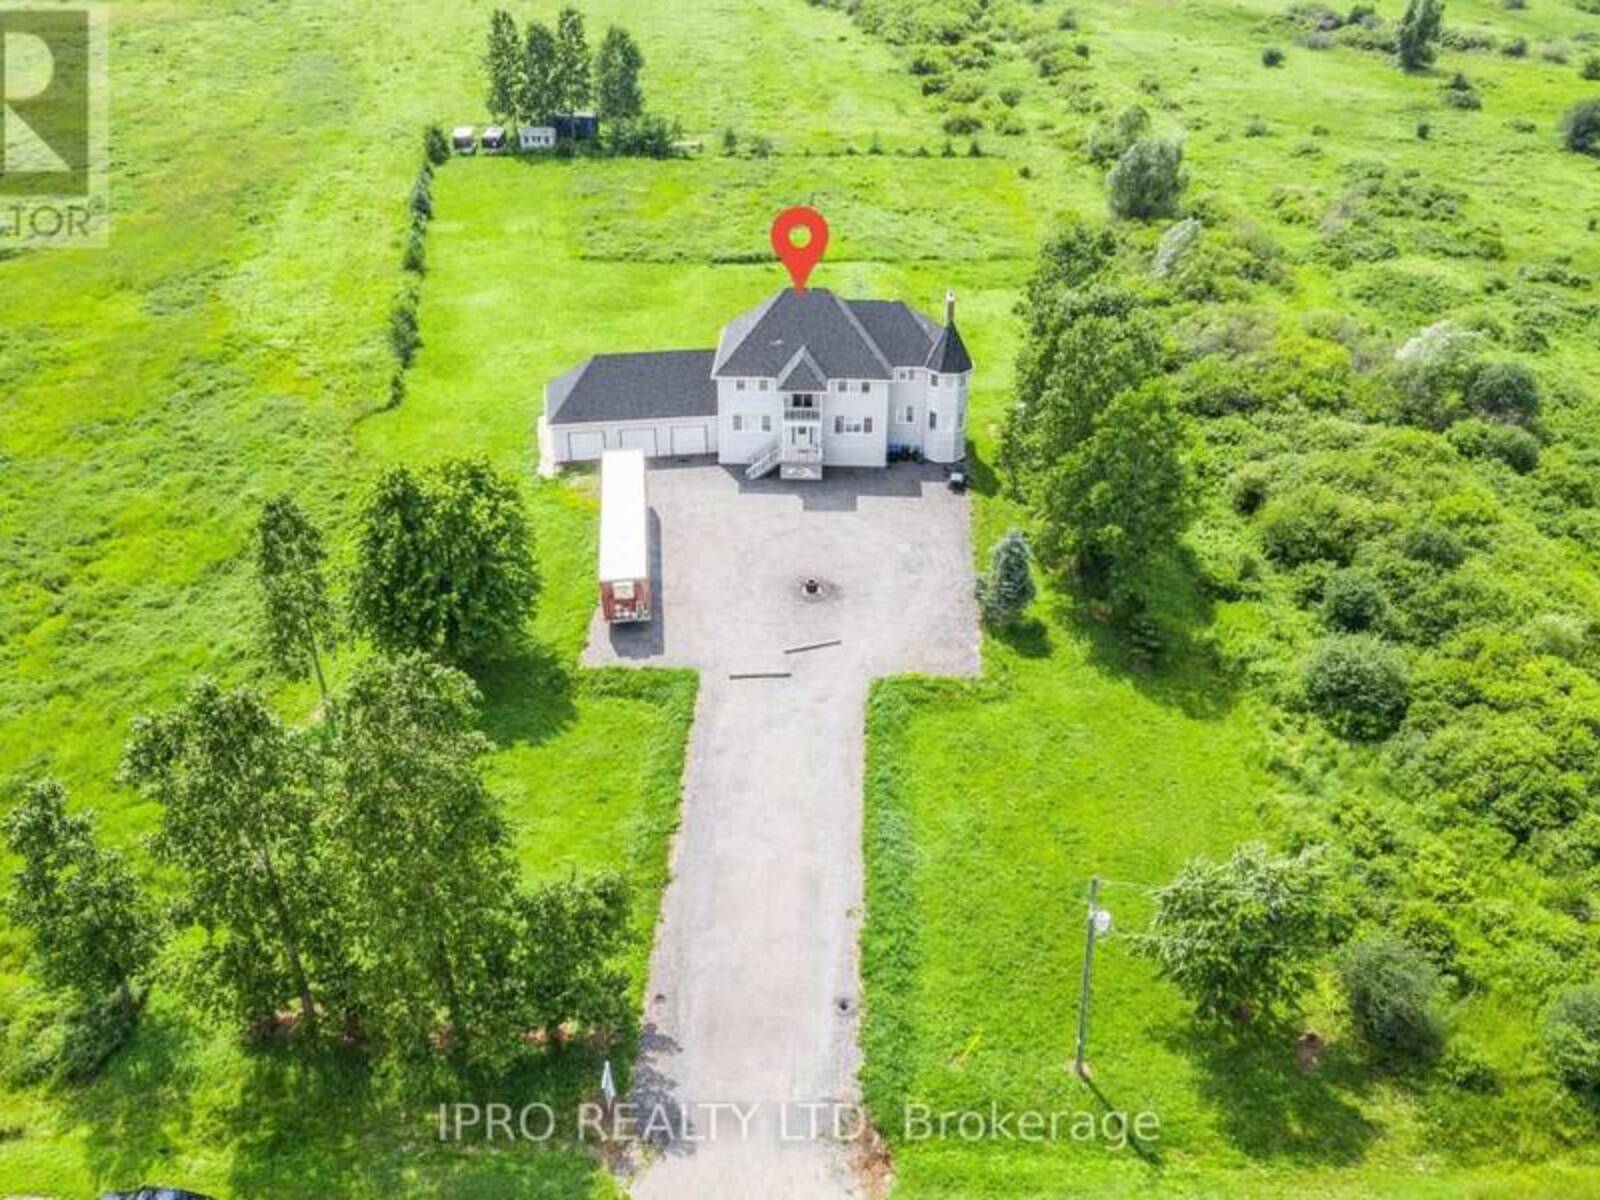 4270 COUTY 50 RD, Adjala-Tosorontio, Ontario L0G 1L0